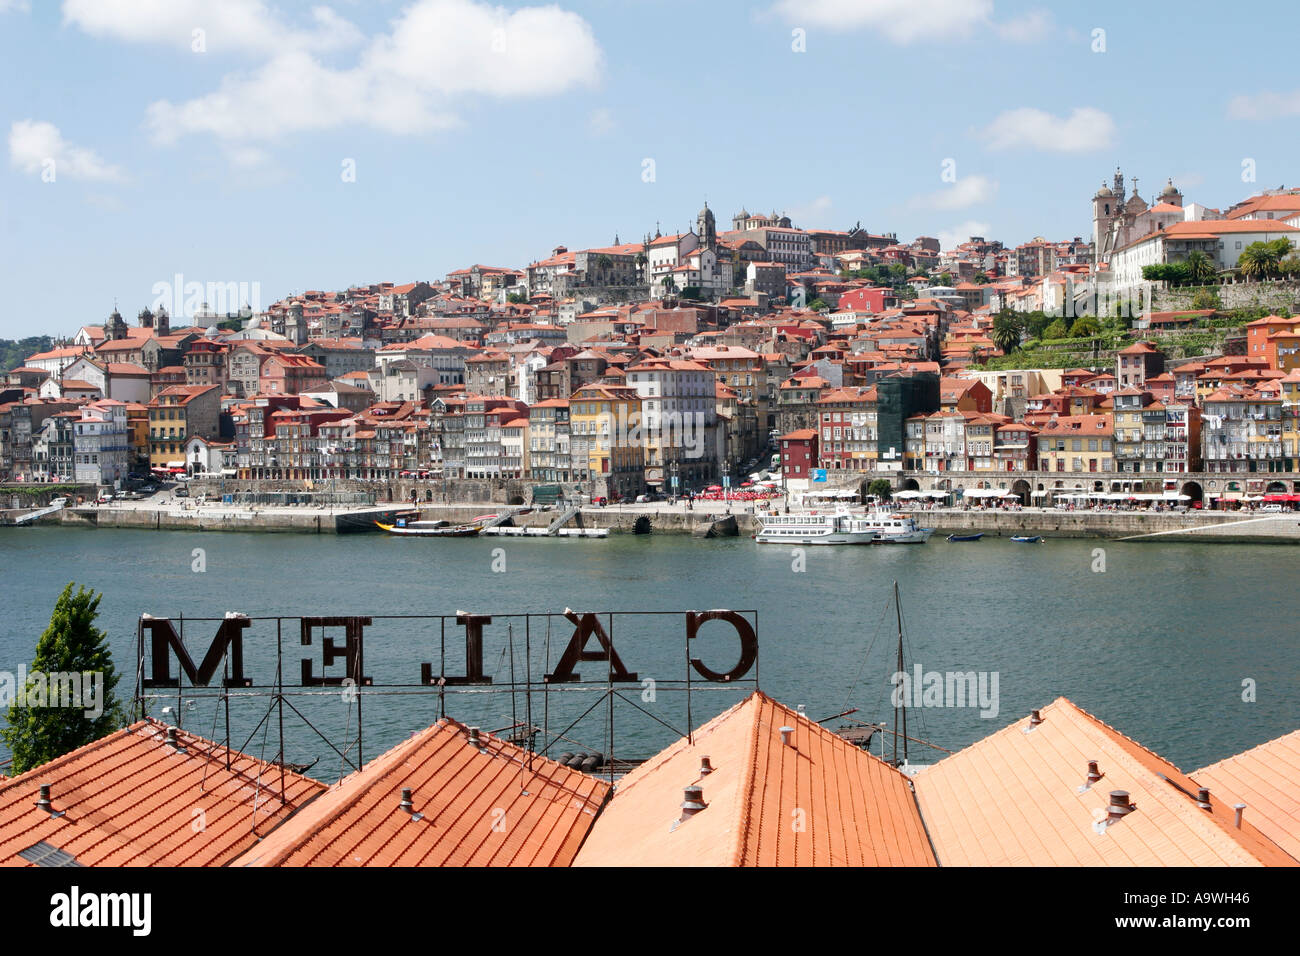 Calem port house by the River Douro in Porto Portugal Stock Photo - Alamy